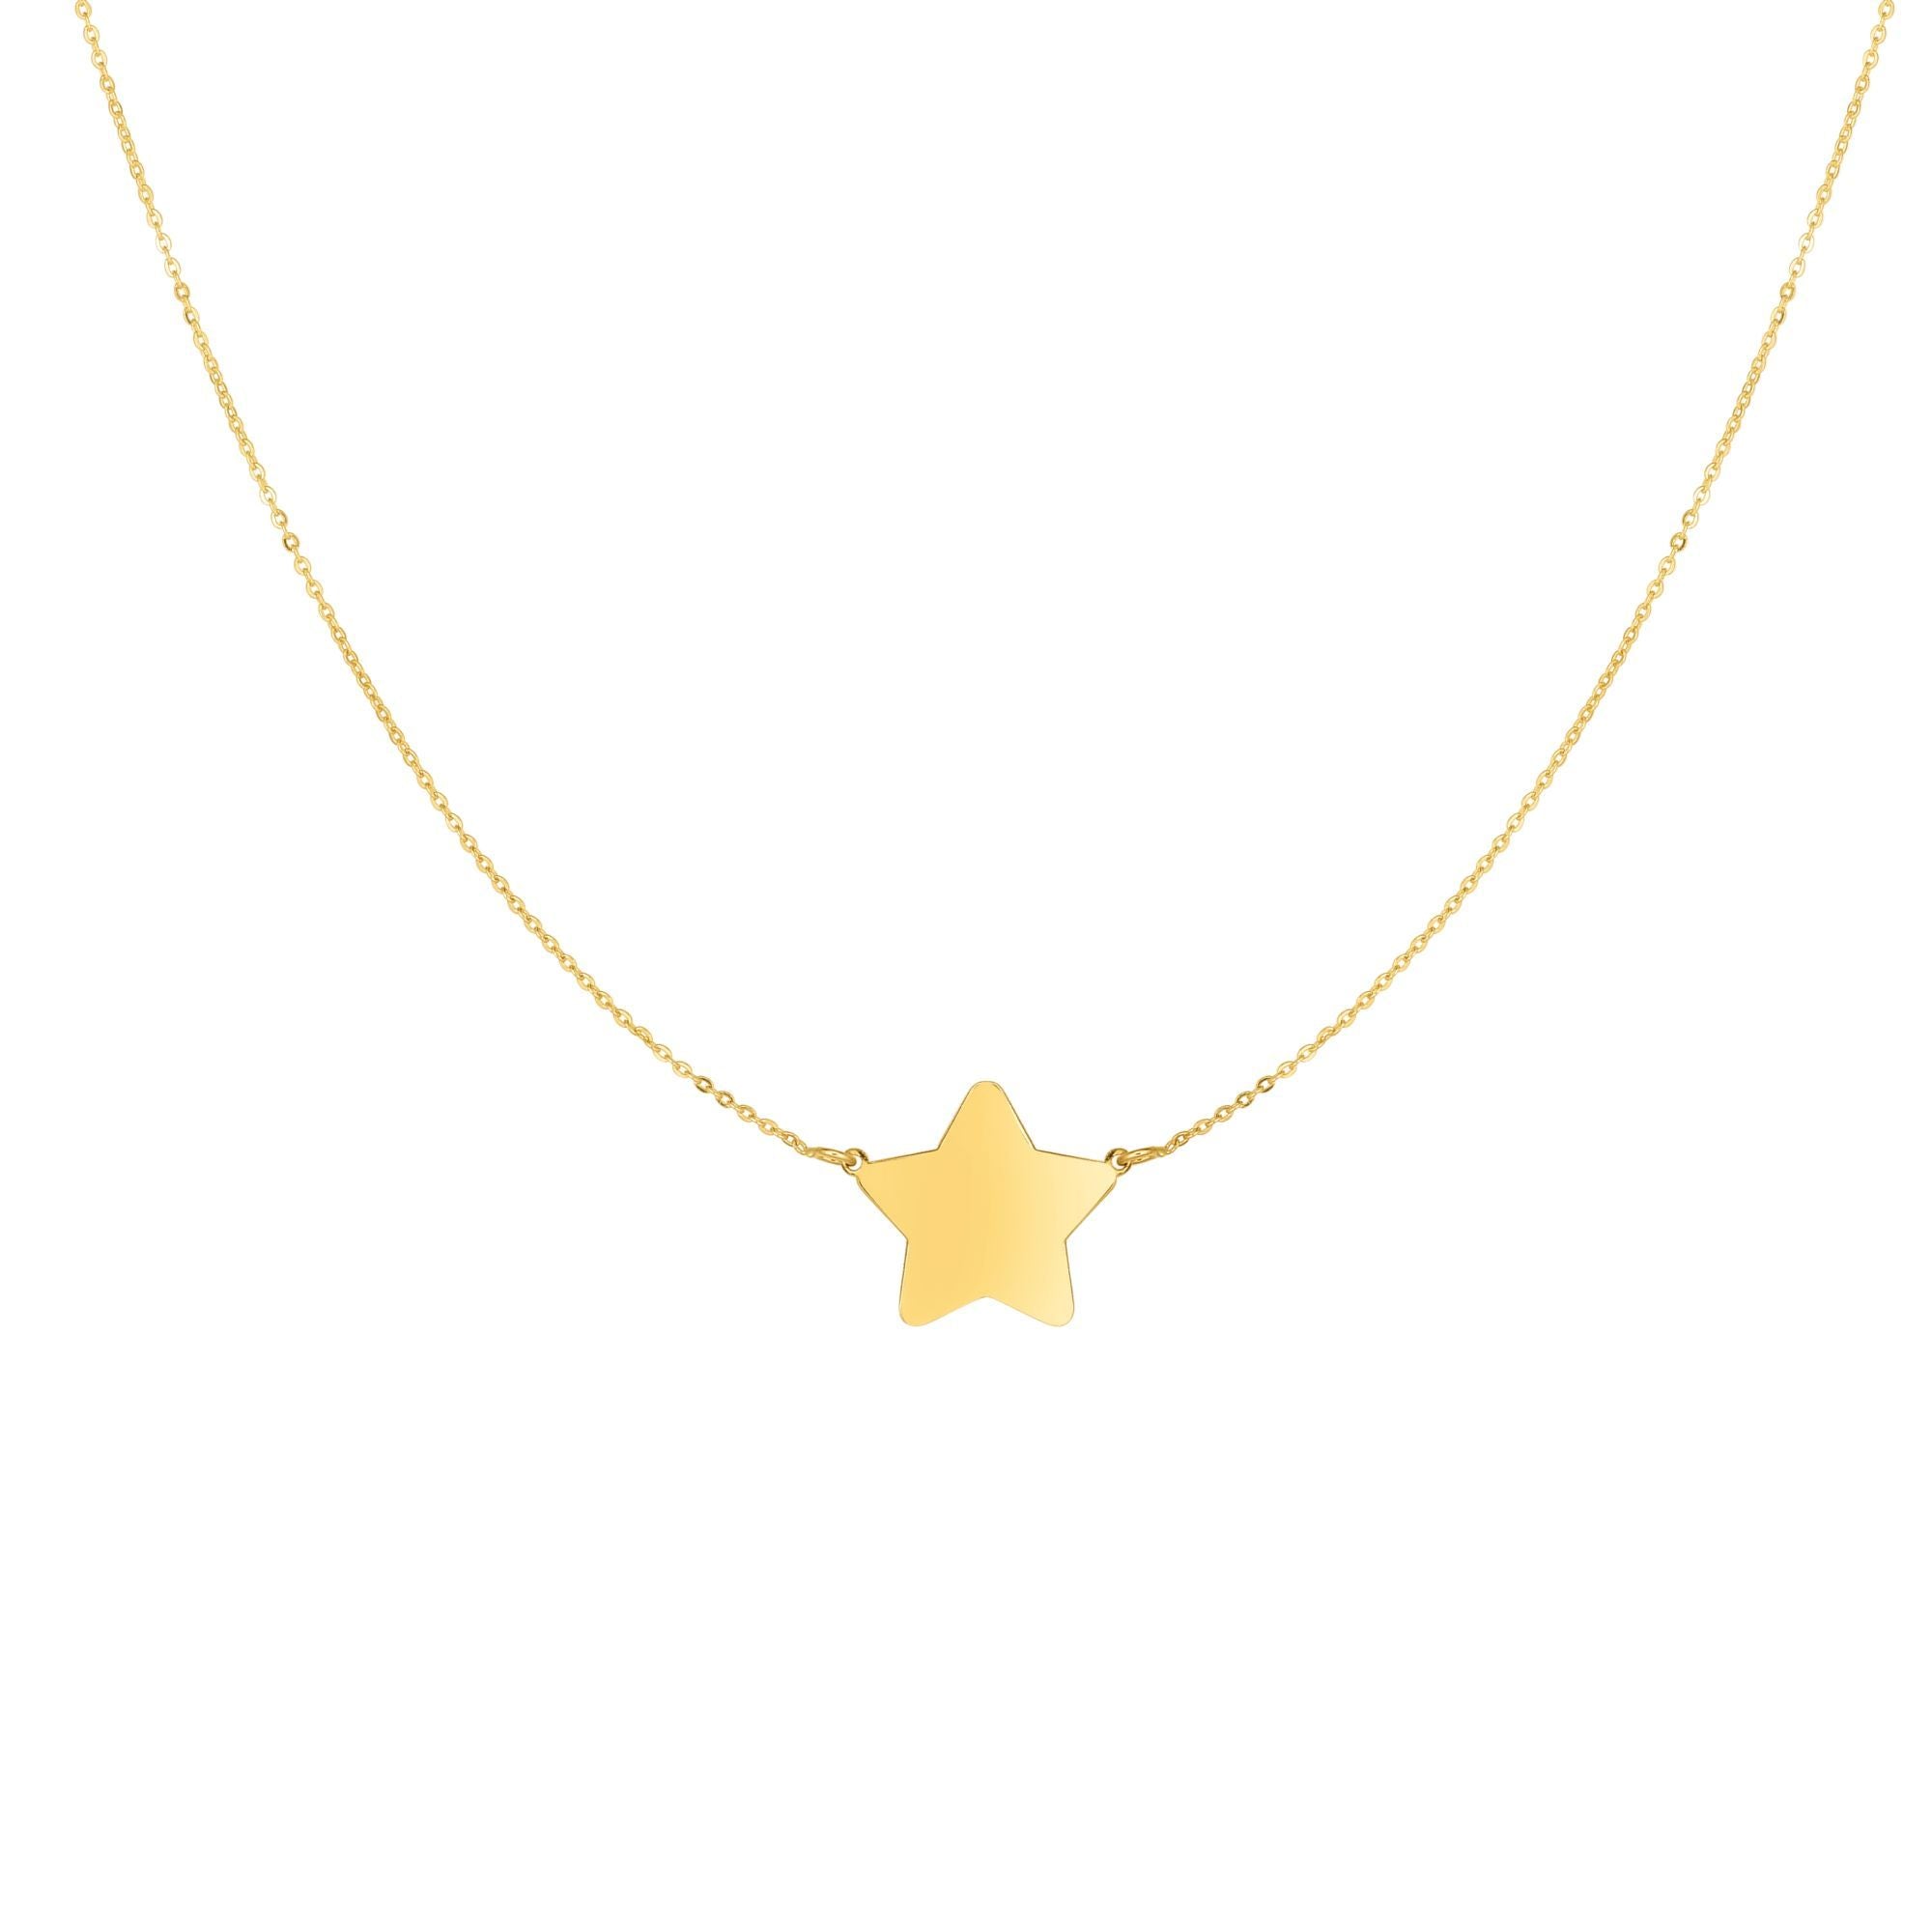 Shiny Flat Extendable Shooting Star, Lucky Star Necklace with Spring Ring Clasp - wingroupjewelry